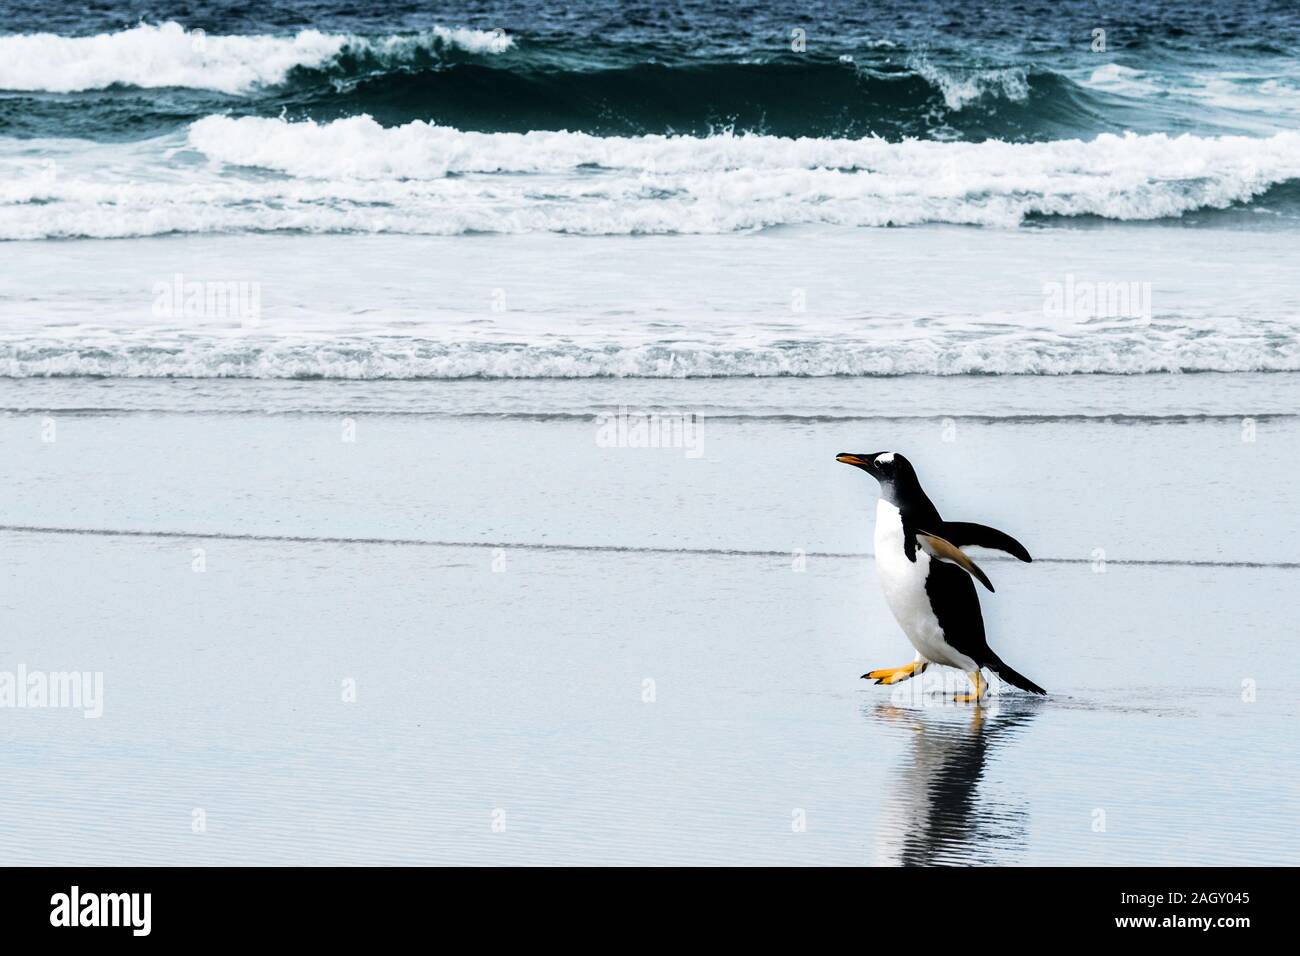 Wild, adult Gentoo Penguin, Pygoscellis papua, walking on the beach at the Neck, Saunders Island, in the Falkland Islands, South Atlantic Ocean Stock Photo